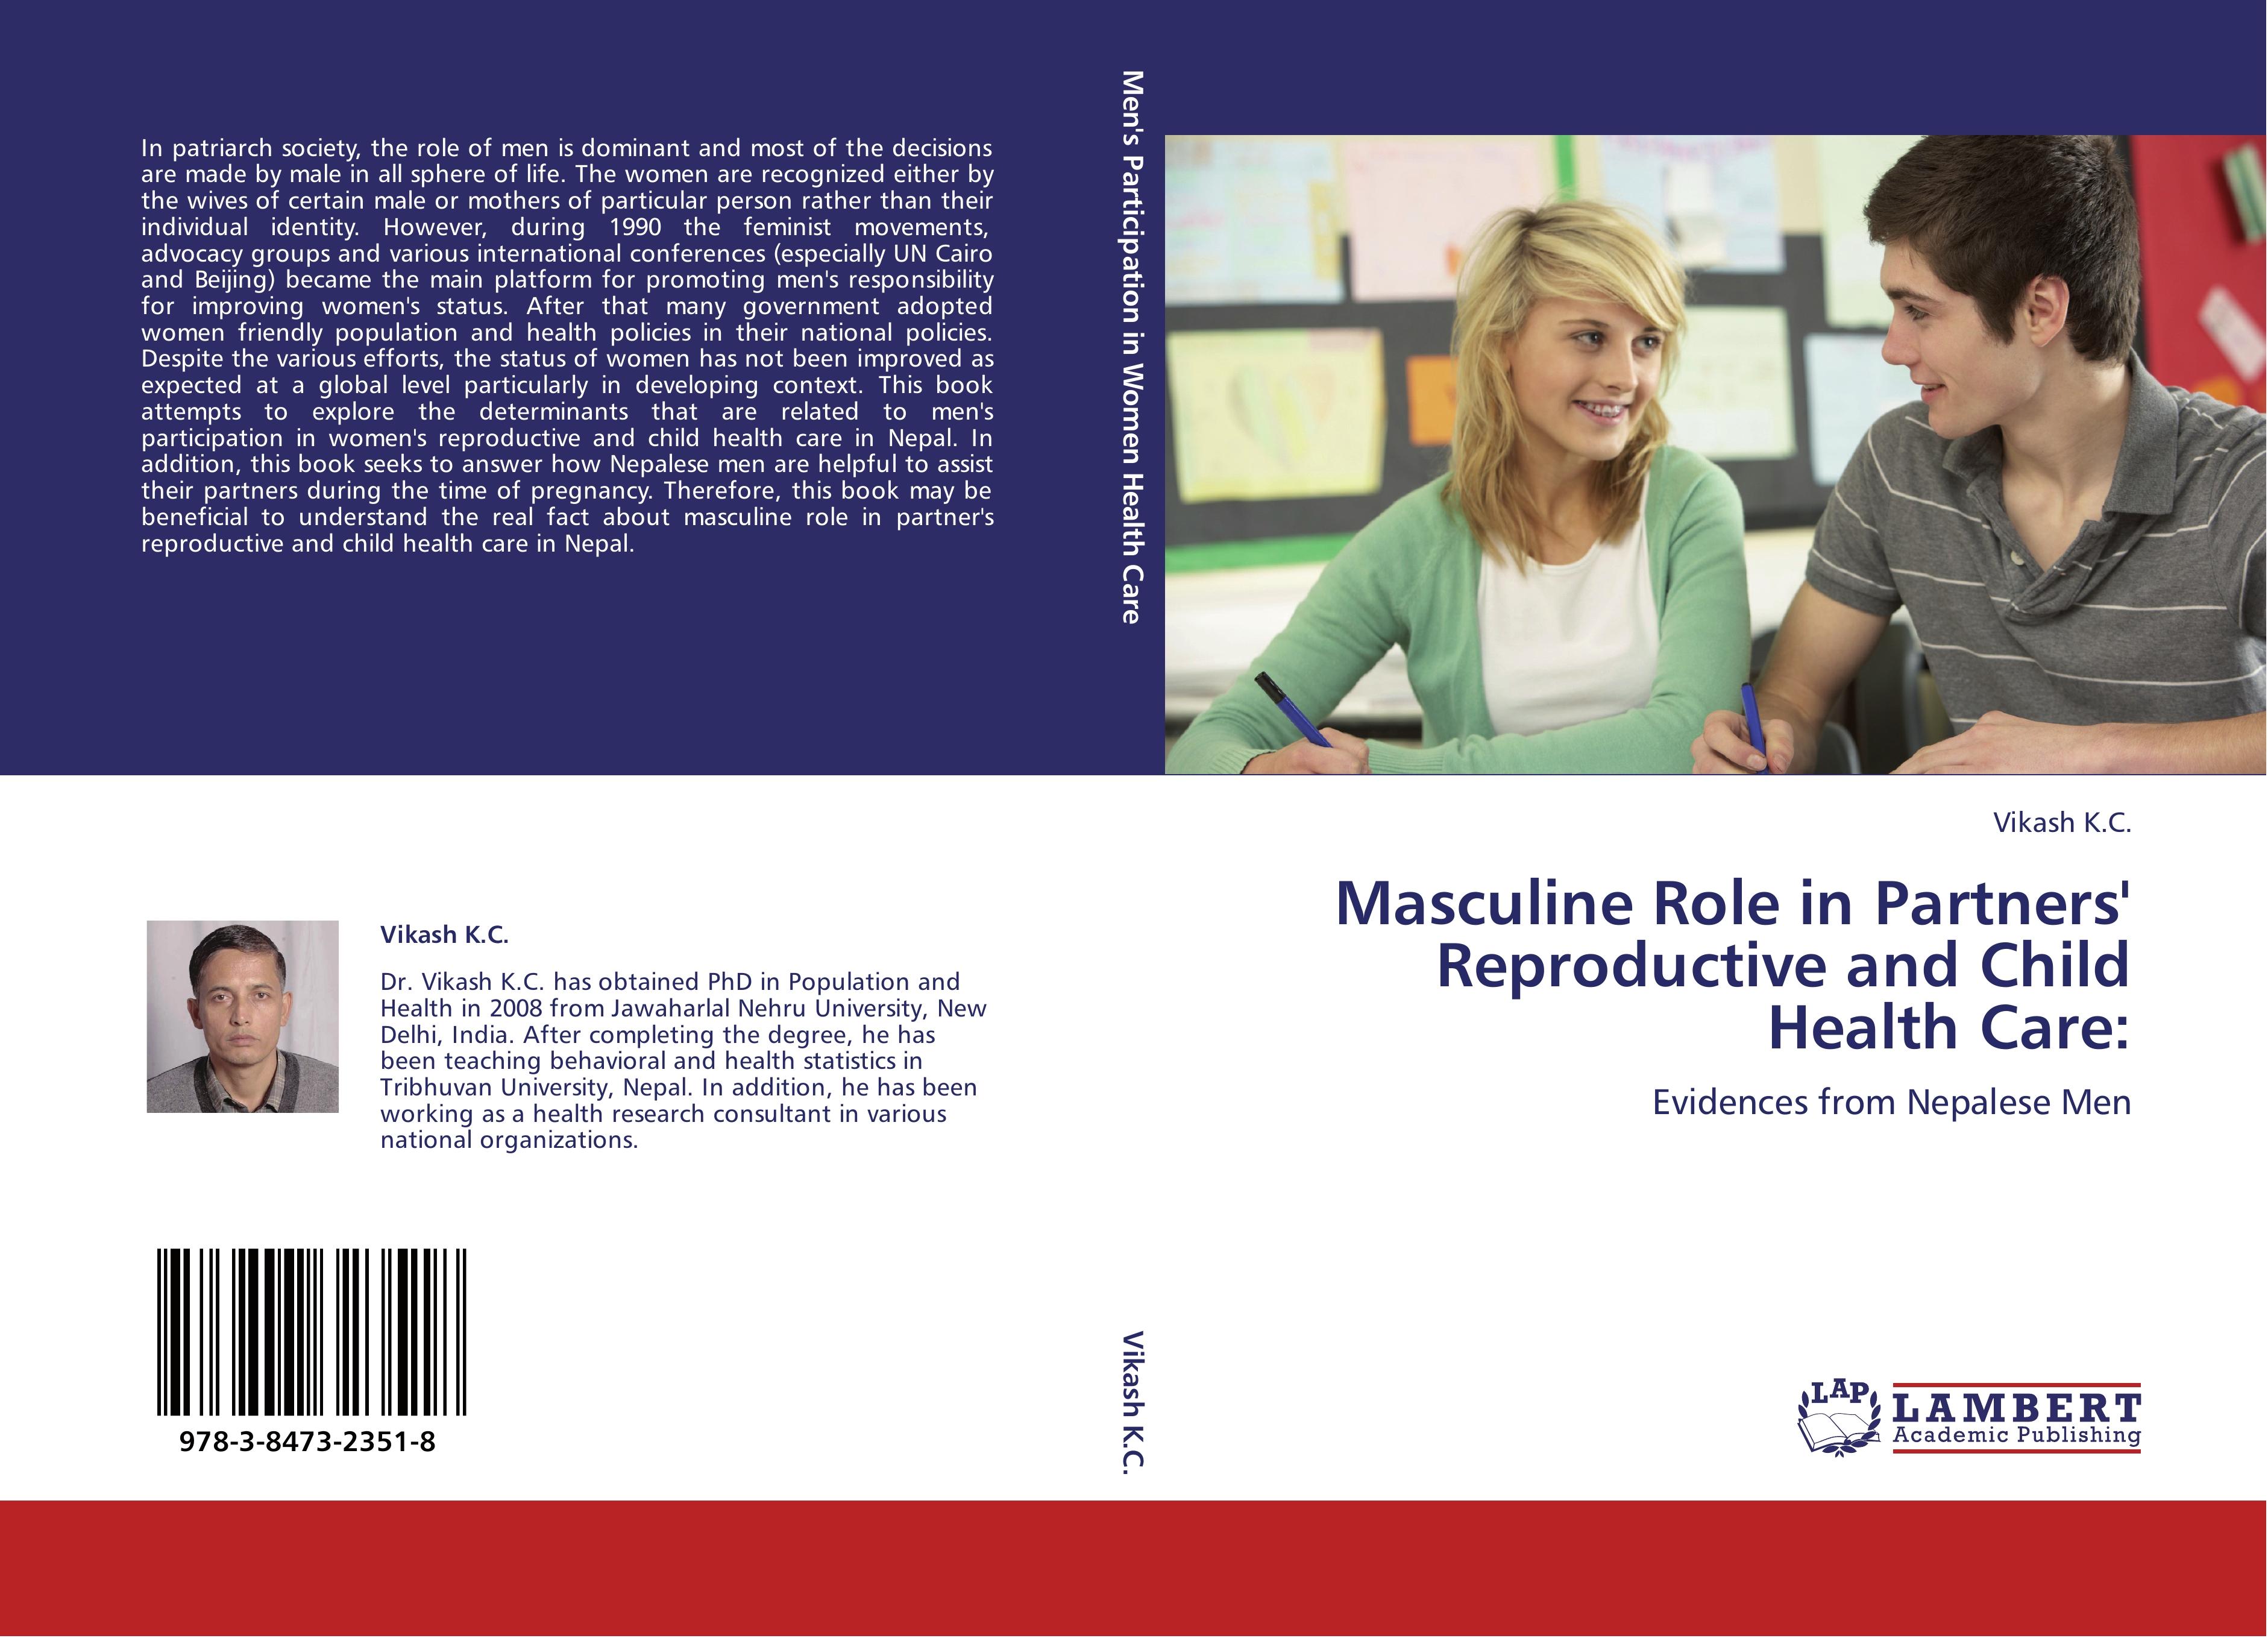 Masculine Role in Partners' Reproductive and Child Health Care: / Evidences from Nepalese Men / Vikash K. C. / Taschenbuch / Paperback / 144 S. / Englisch / 2012 / LAP LAMBERT Academic Publishing - K. C., Vikash